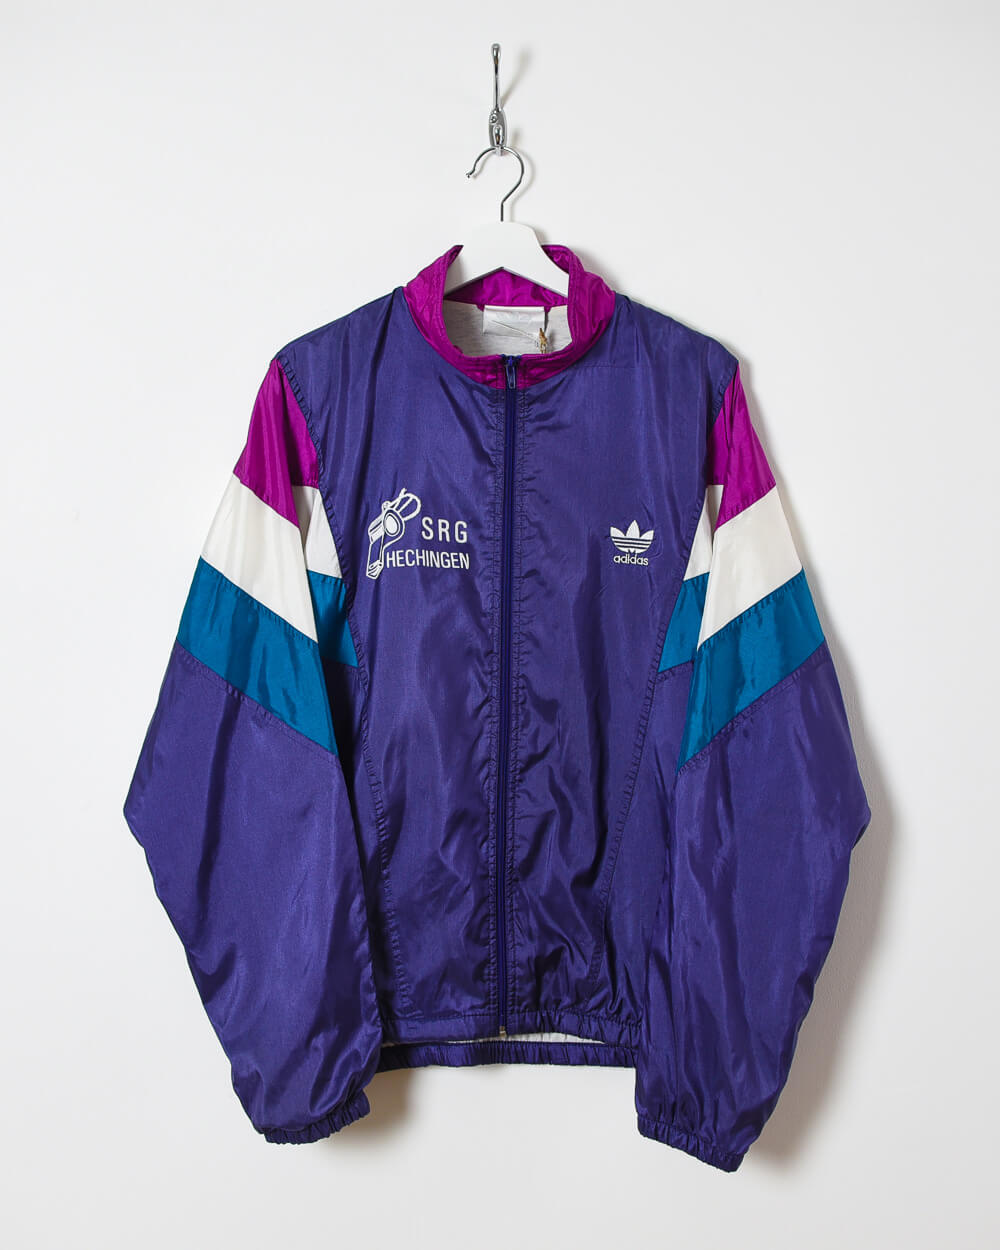 Adidas Shell Jacket - Large - Domno Vintage 90s, 80s, 00s Retro and Vintage Clothing 